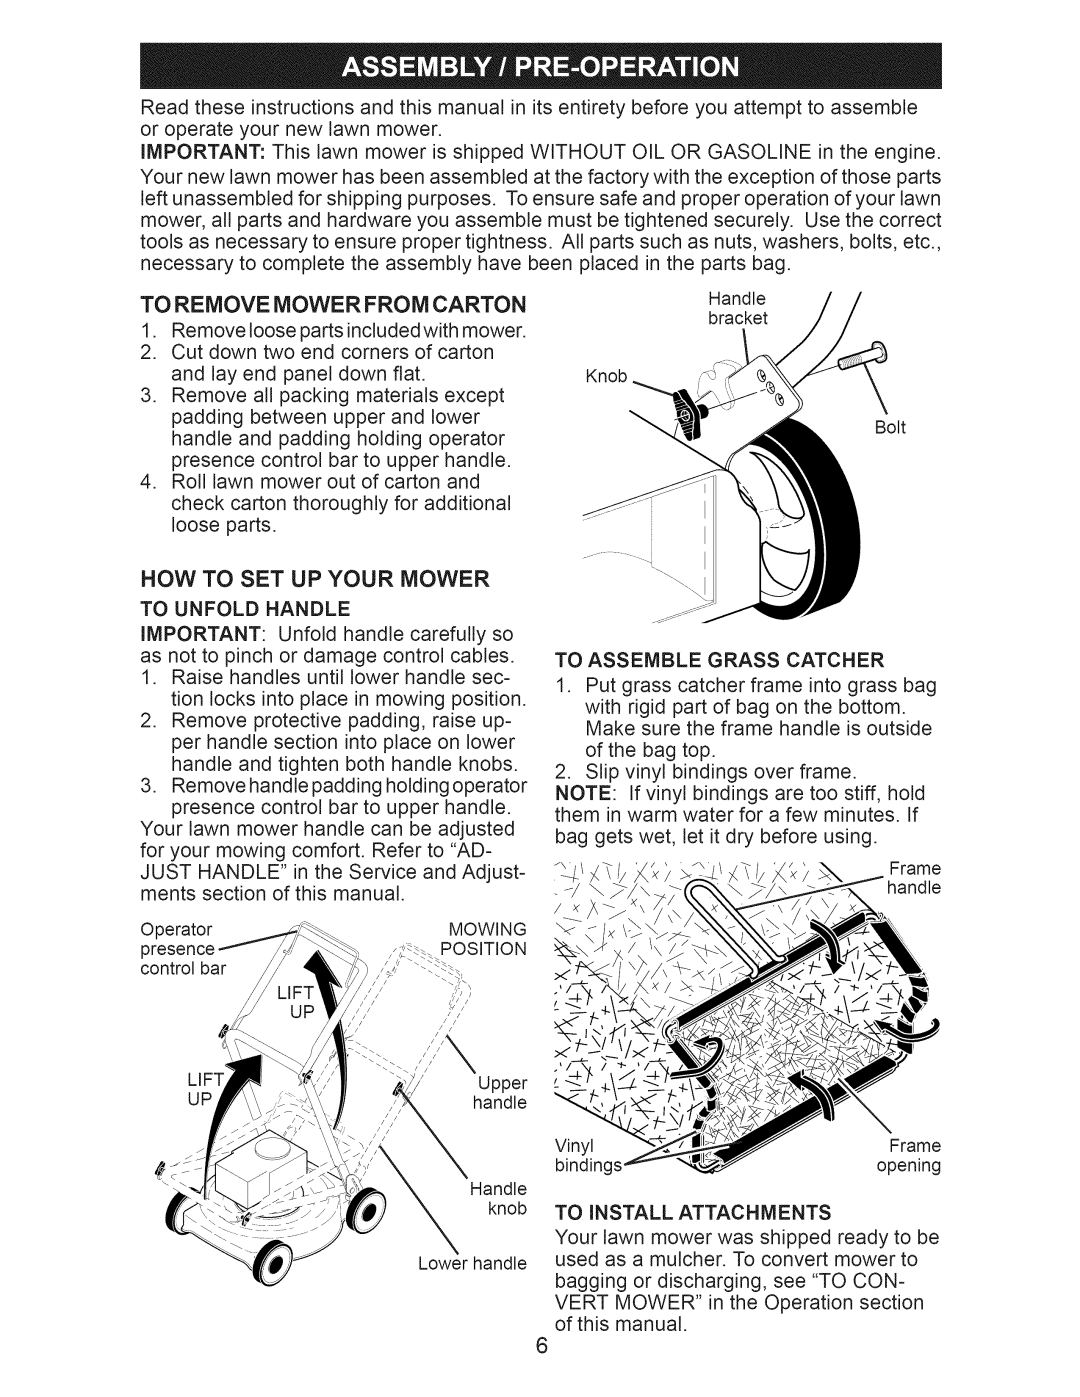 Craftsman 917.376402 owner manual To Remove Mower From Carton, Now To Set Up Your Mower 